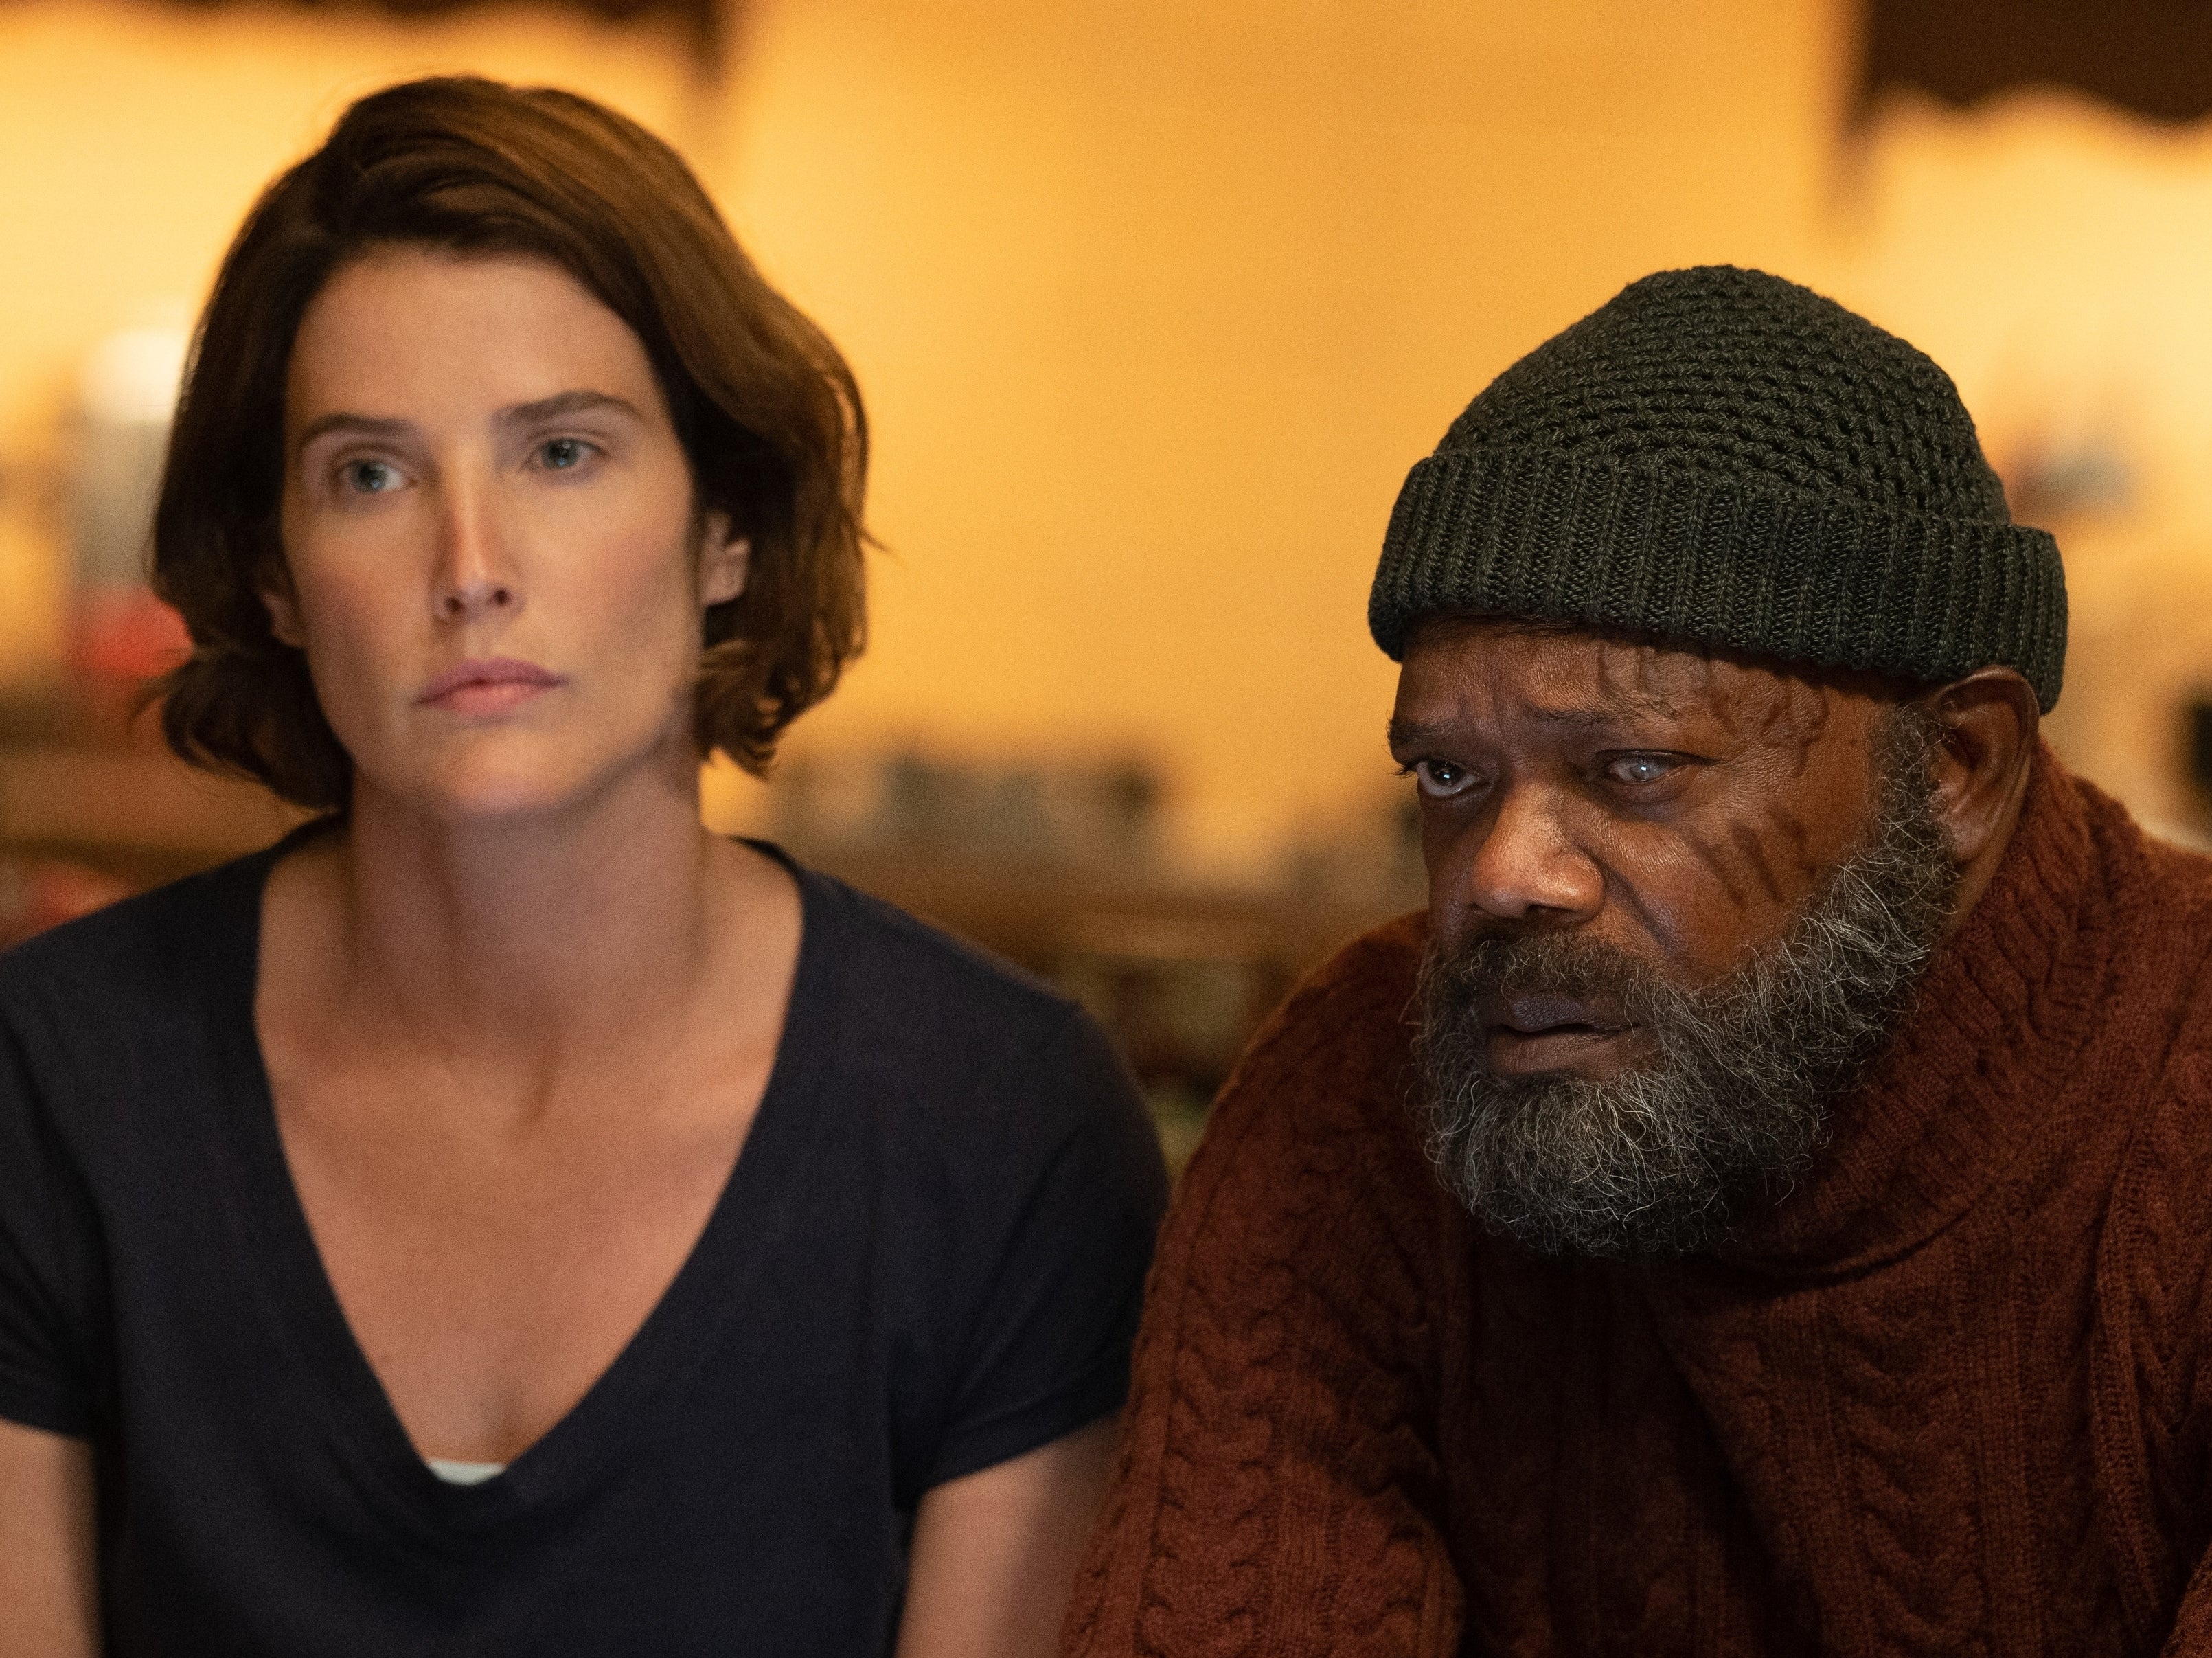 Cobie Smulders as Maria Hill and Samuel L Jackson as Nick Fury in Marvel Studios’ ‘Secret Invasion’